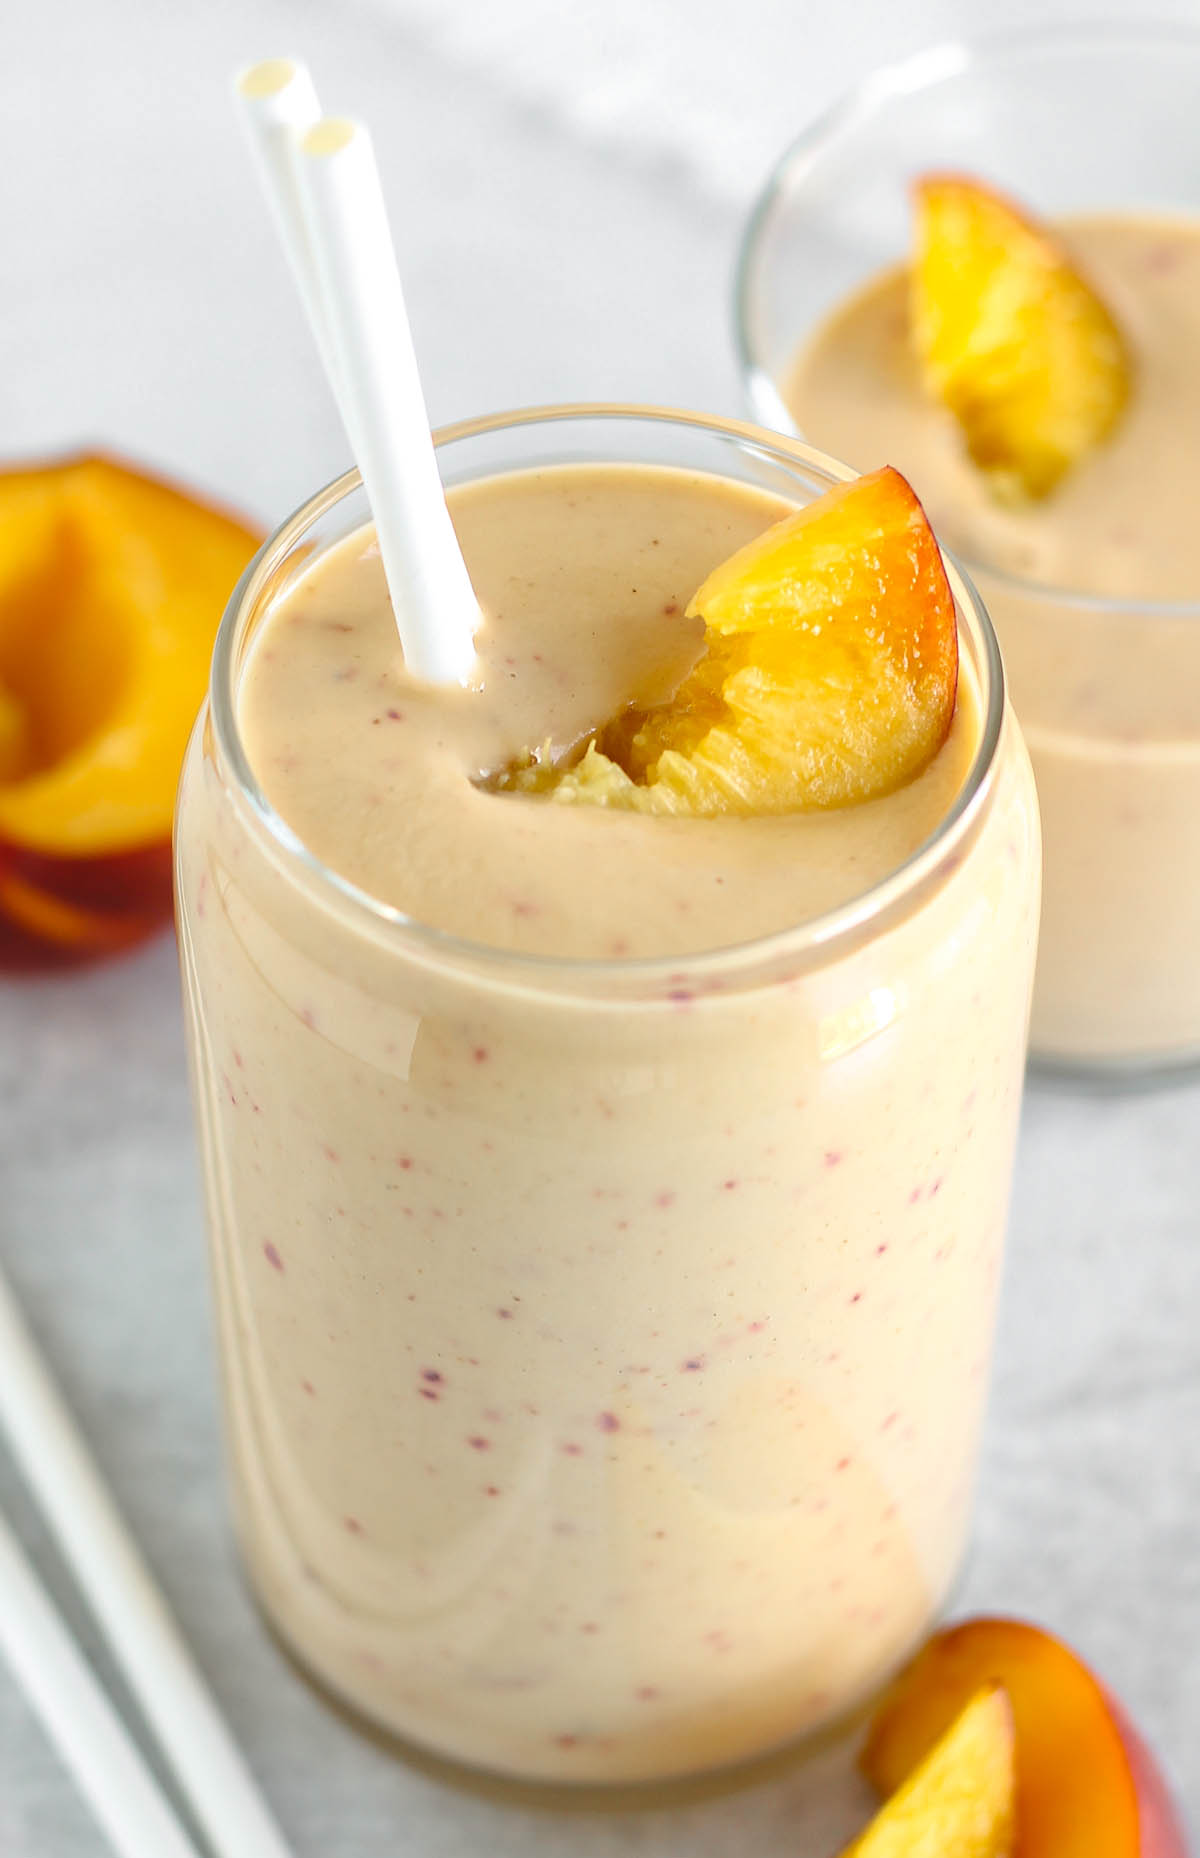 Tall glass filled with a peach banana smoothie topped with a peach slice and two straws.